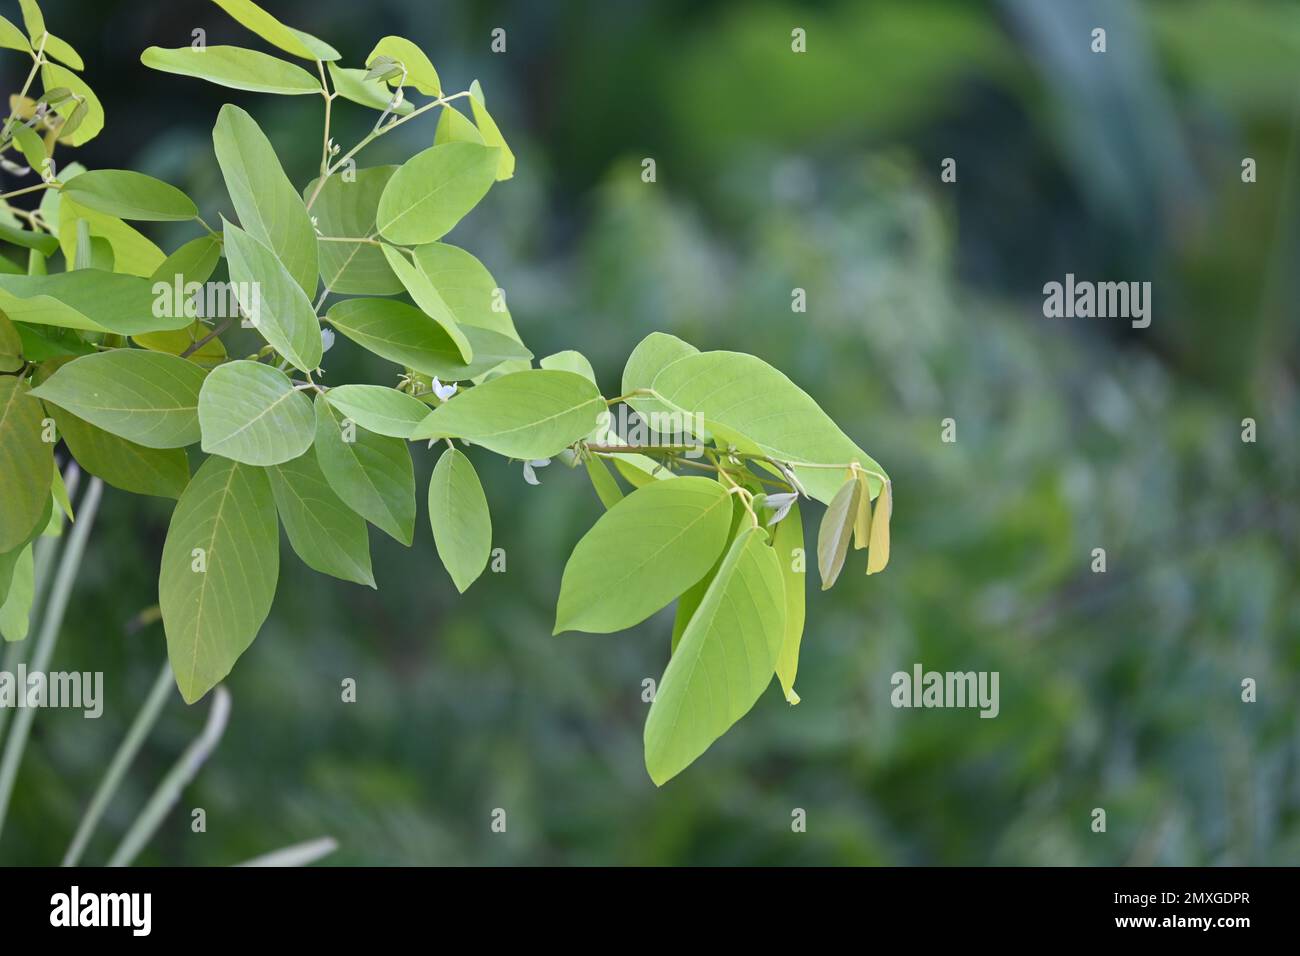 A closeup of green leaves of Cocculus orbiculatus, blurred background Stock Photo